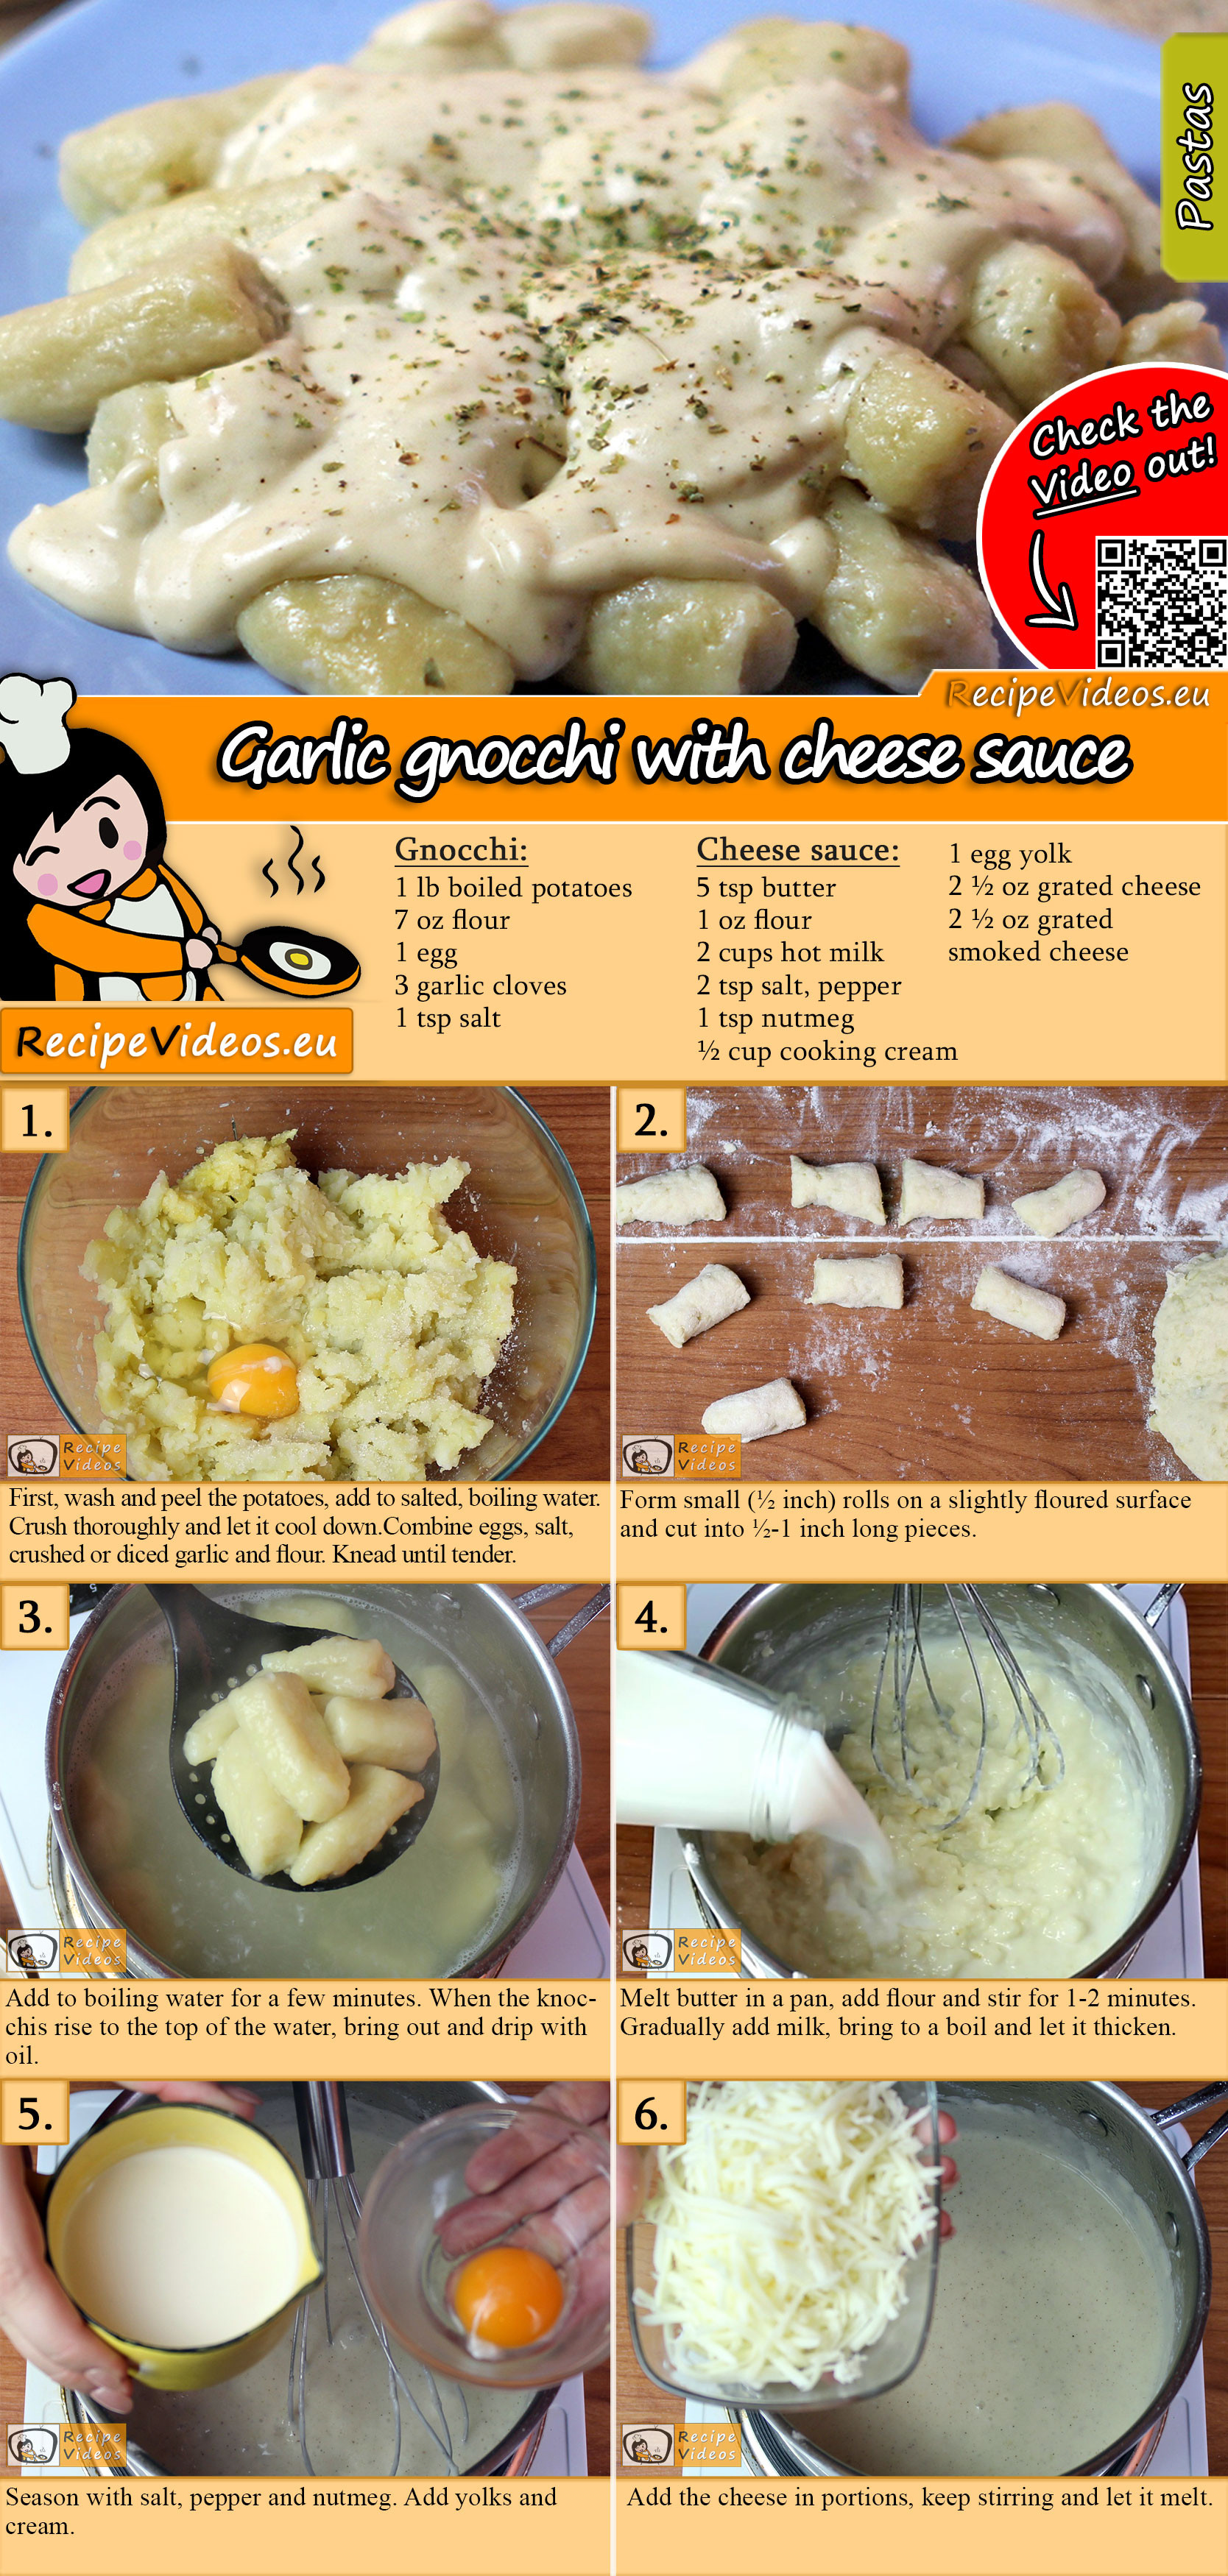 Garlic gnocchi with cheese sauce recipe with video